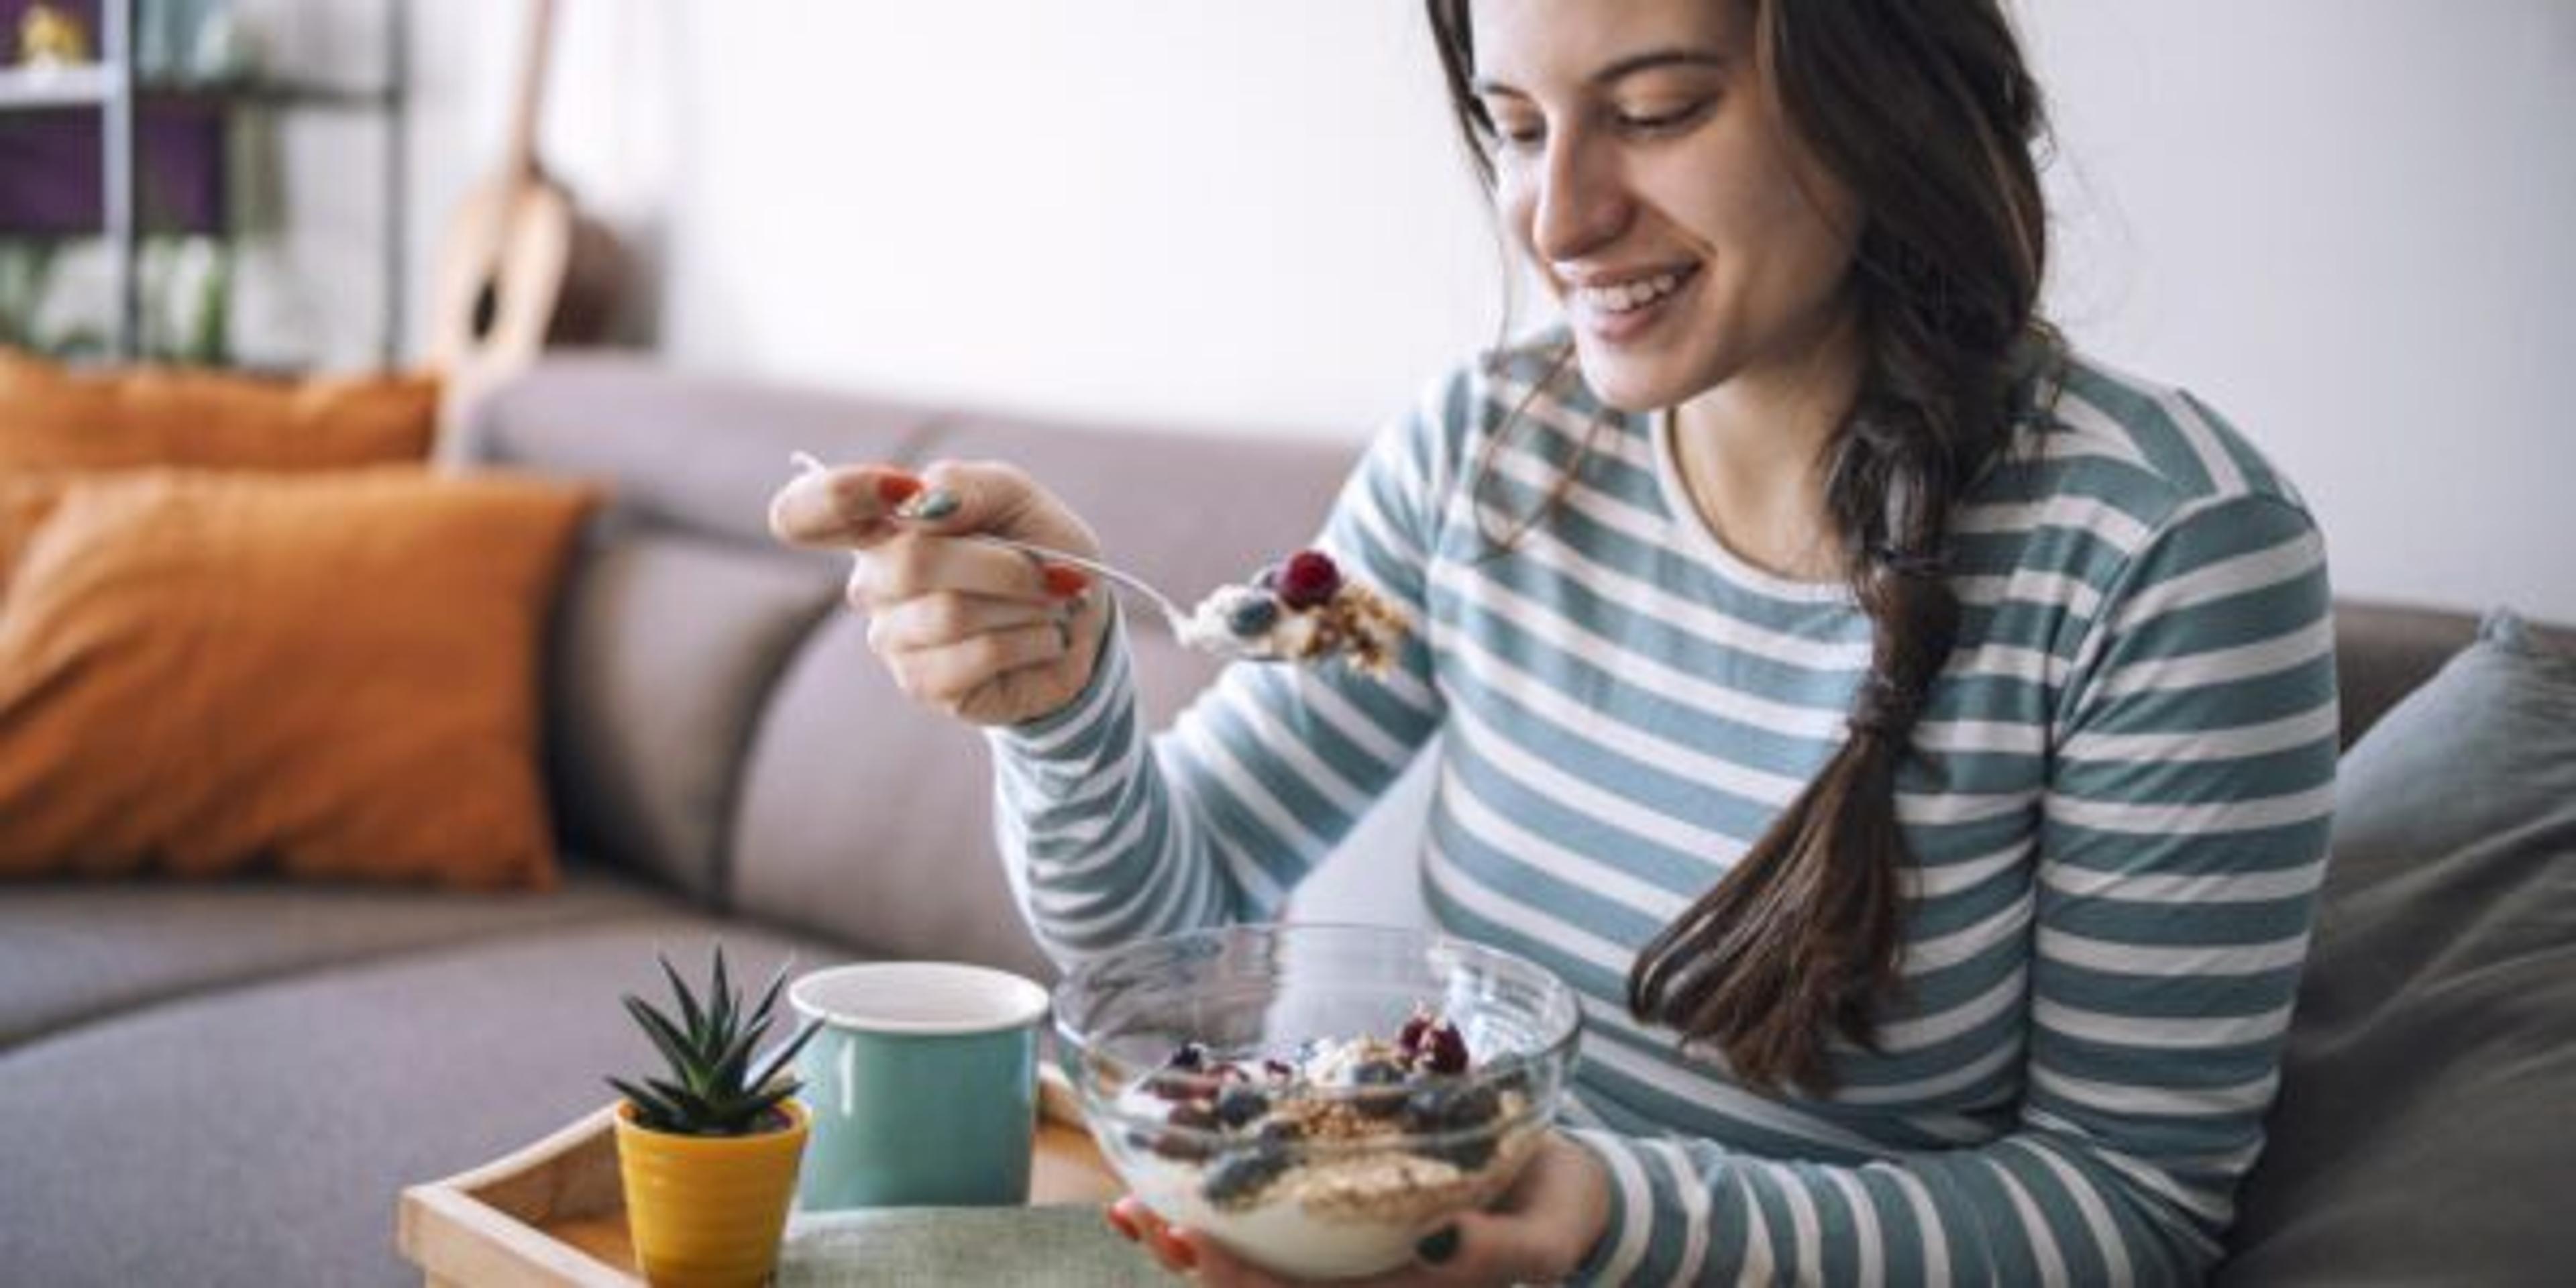 Smiling Woman Having Breakfast In The Morning At Home